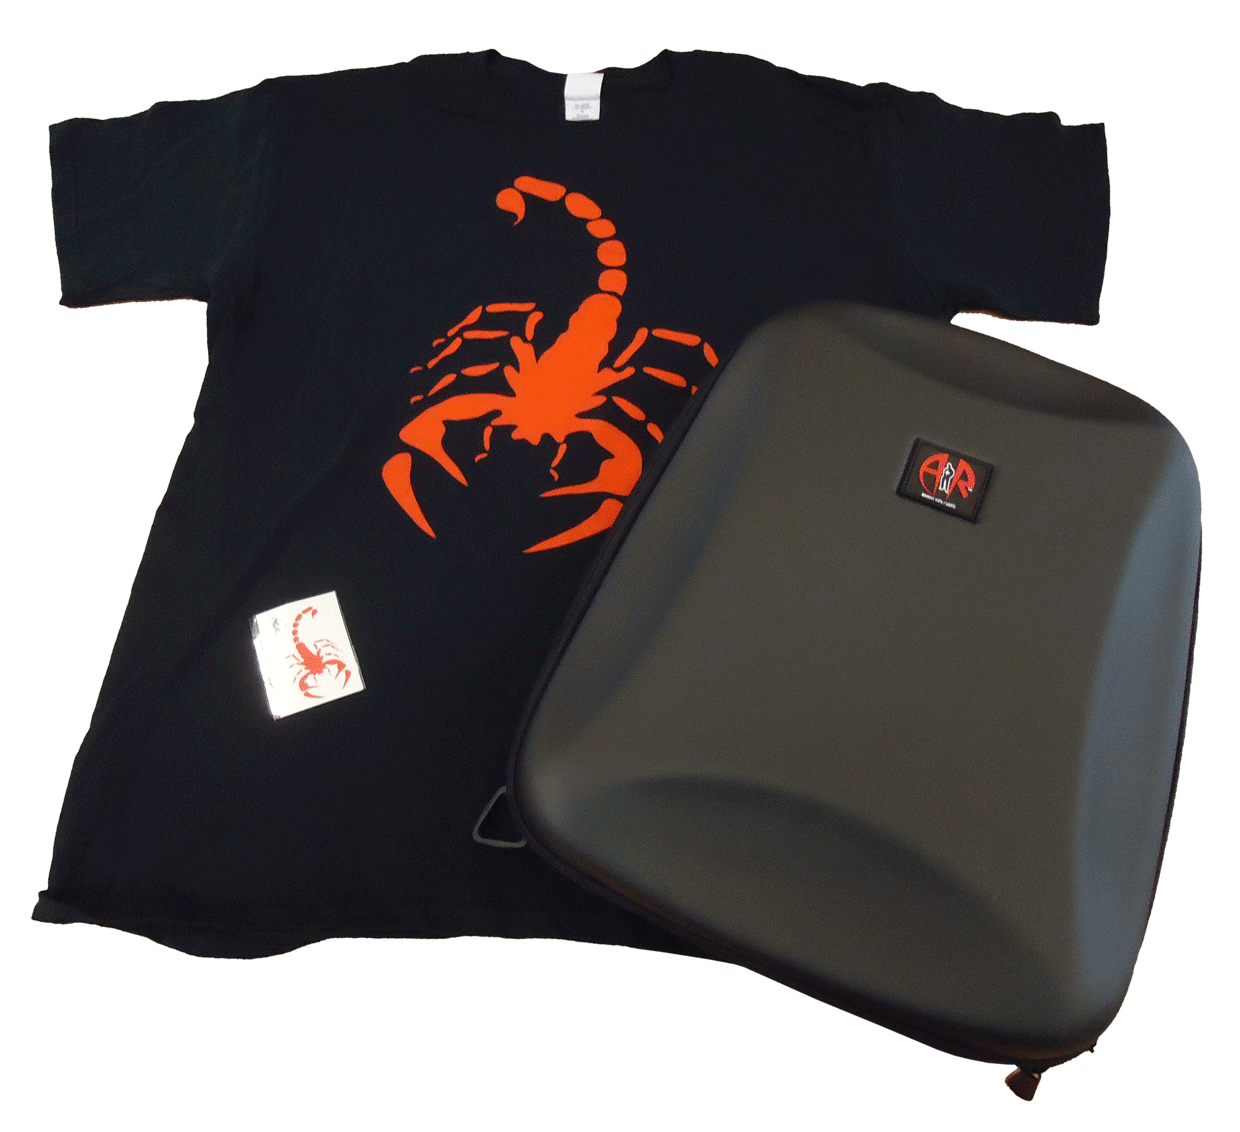 Alex Rider Backpack and Tshirt